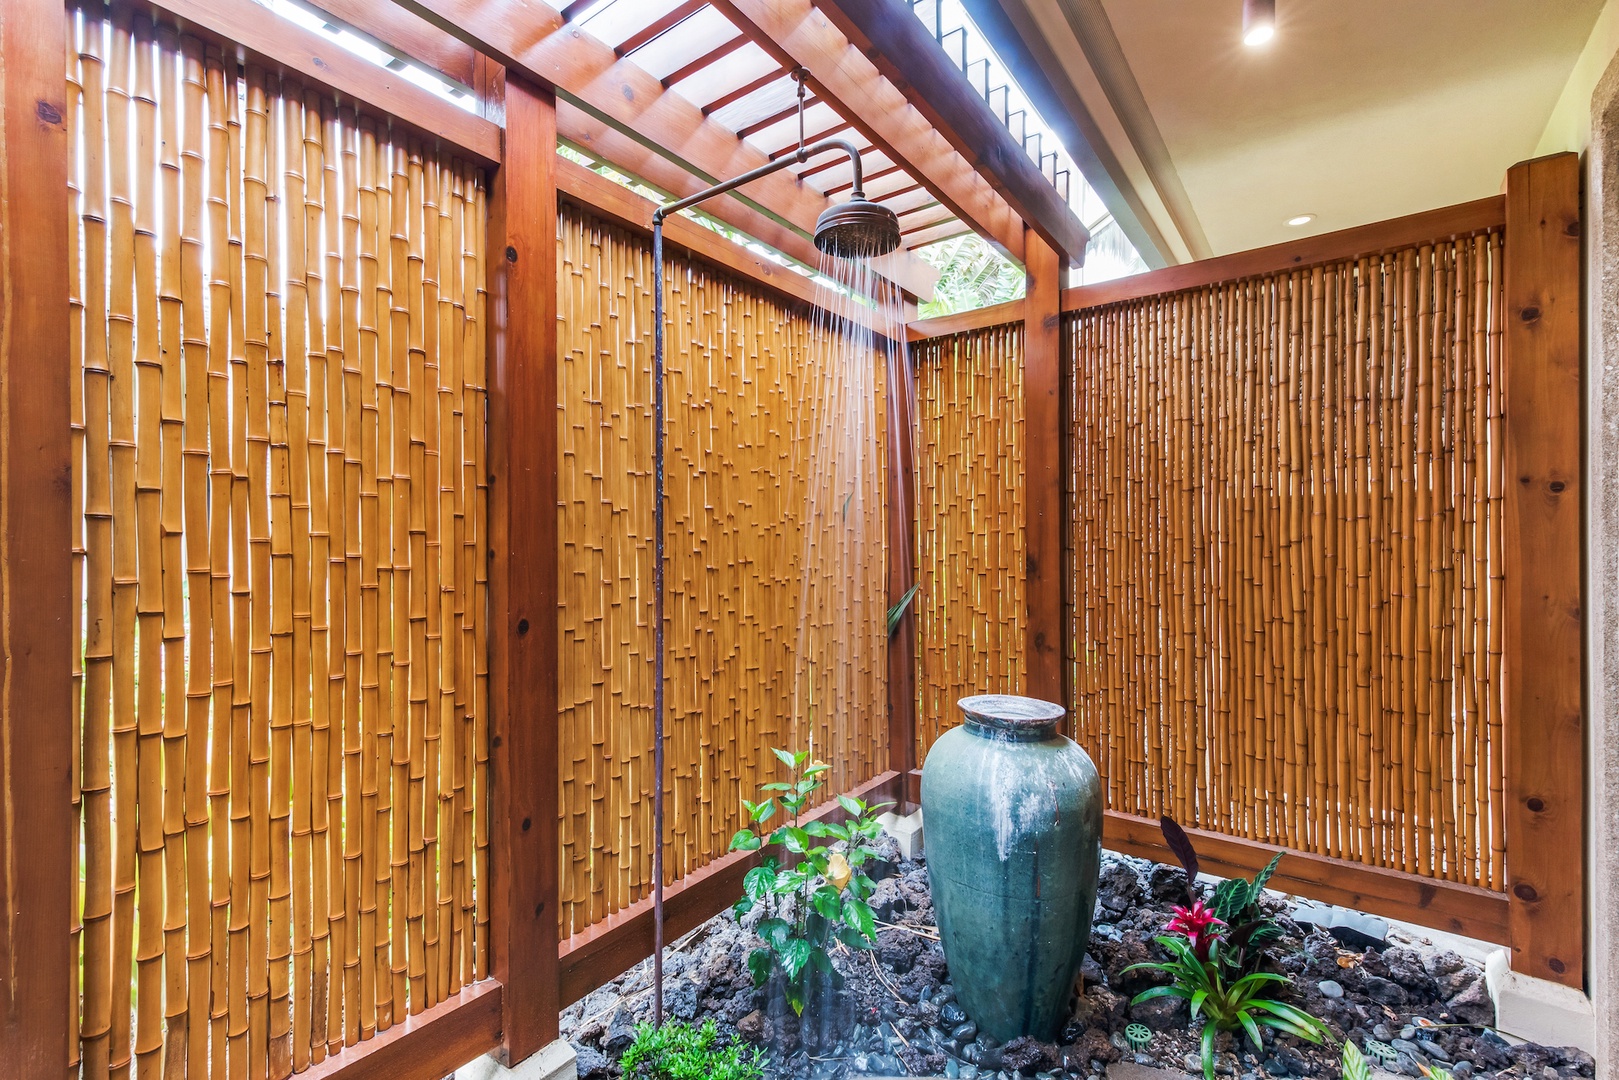 Kamuela Vacation Rentals, 3BD OneOcean (1C) at Mauna Lani Resort - Bamboo Enclosed Outdoor Shower Off Primary Bath, a Tropical Treat!